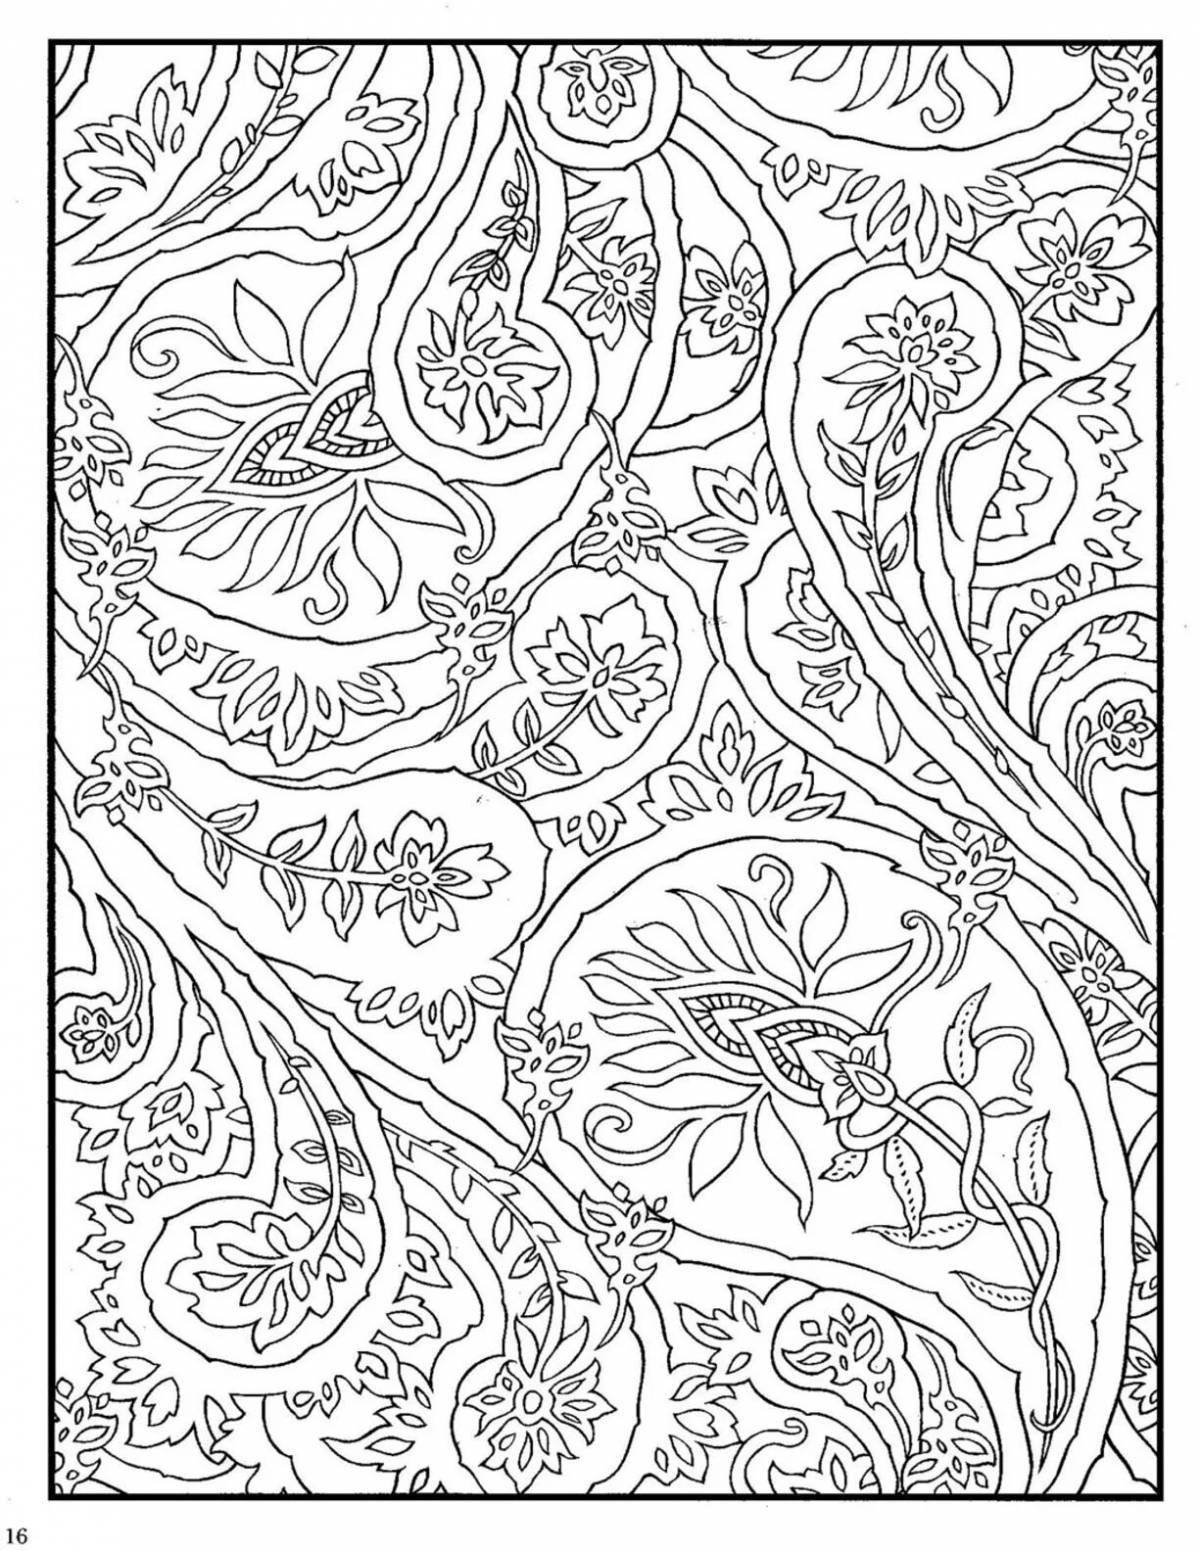 Relaxing soothing coloring pages